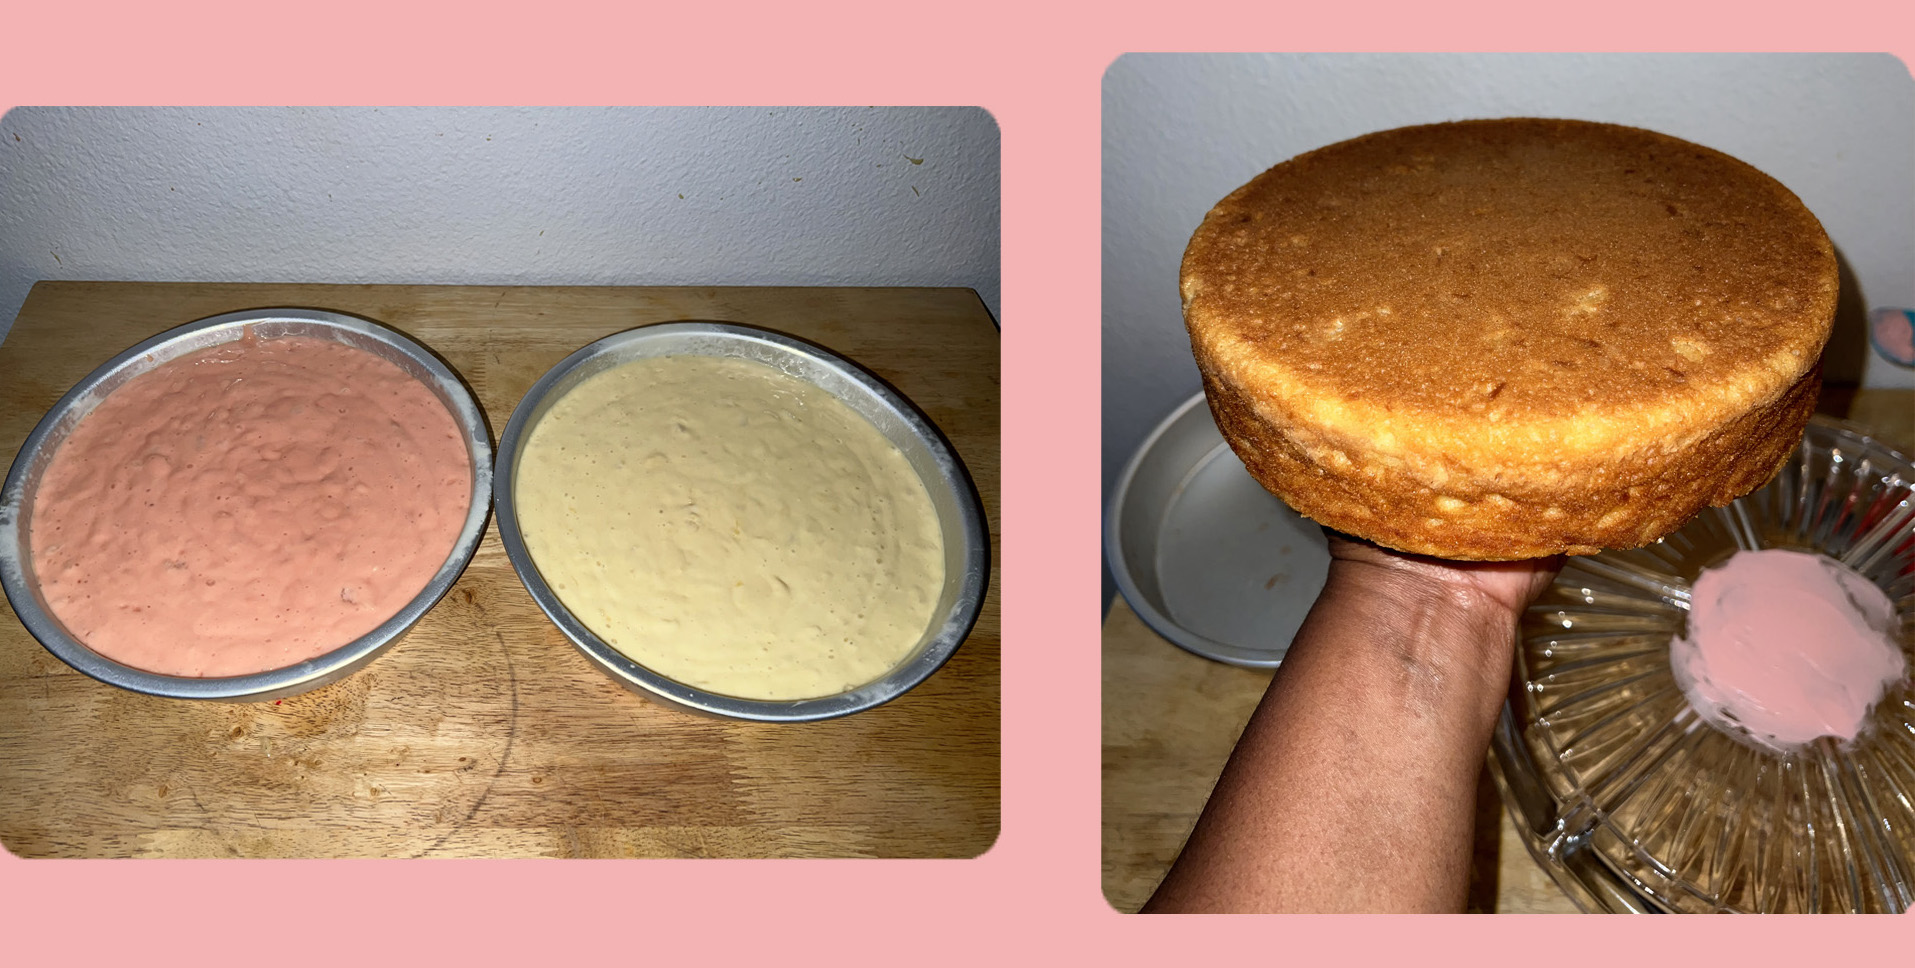 A picture of cake in pans on the left and a hand inverting the cake on the right.